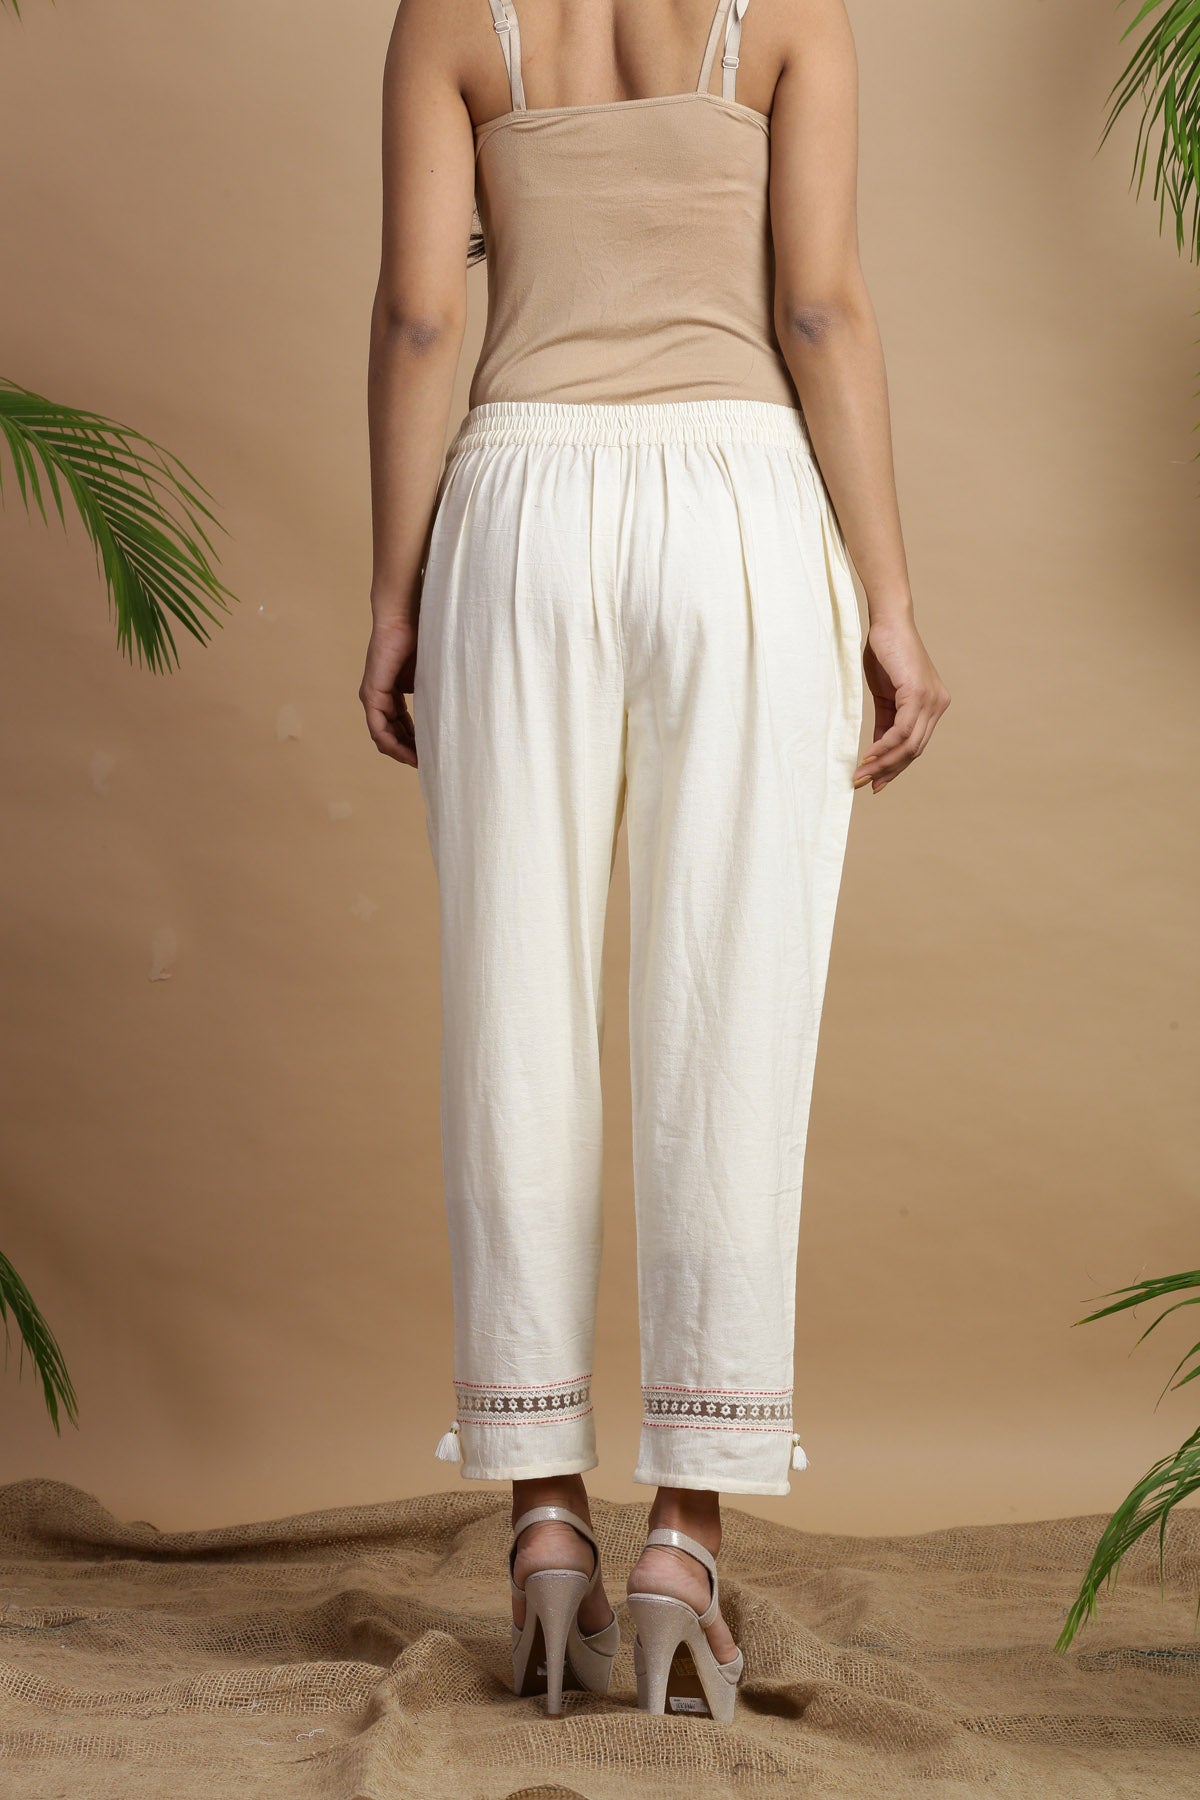 Juniper White Rayon Flex Solid Slim Fit Cigarette Women Pants With One Pocket With Self Design